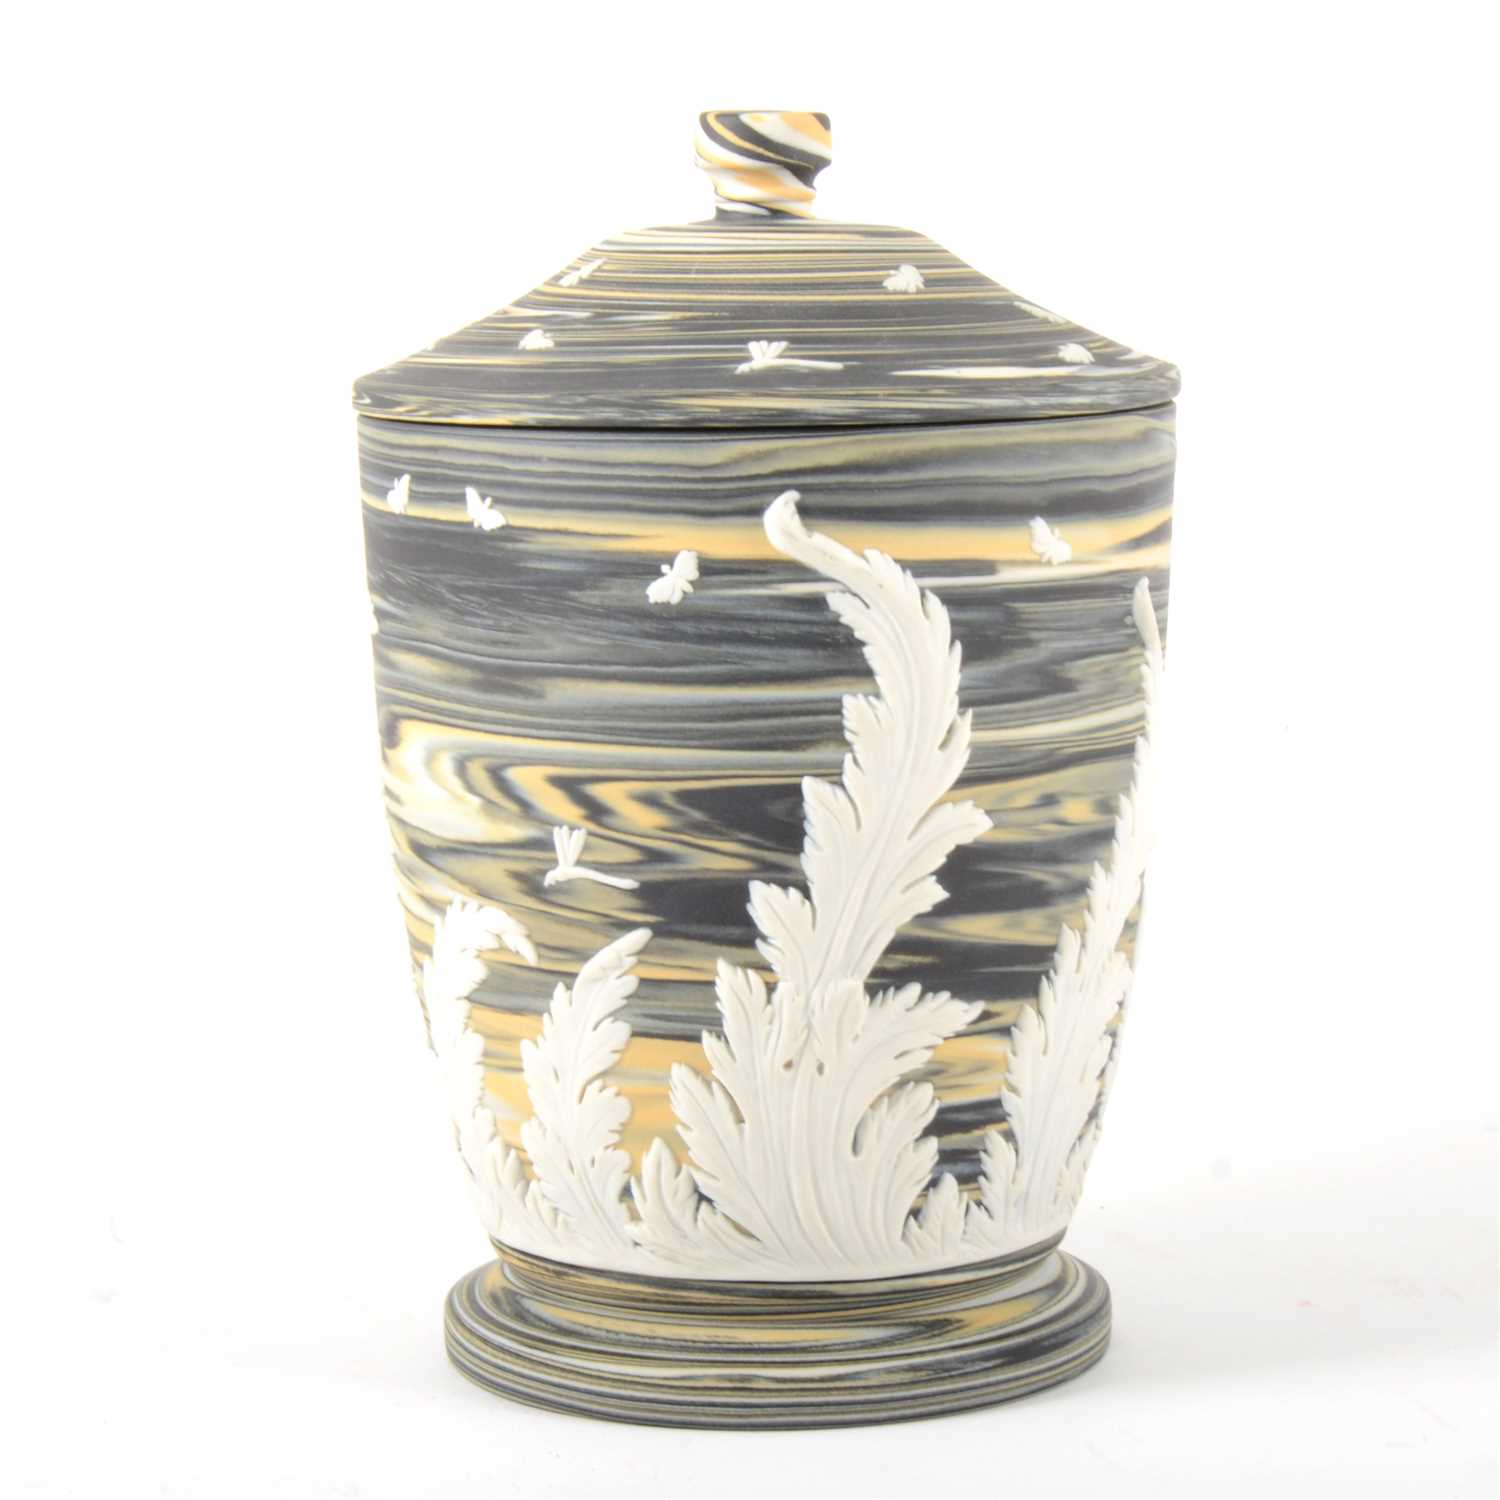 Lot 28 - A marbled Jasperware jar and cover, by Wedgwood.